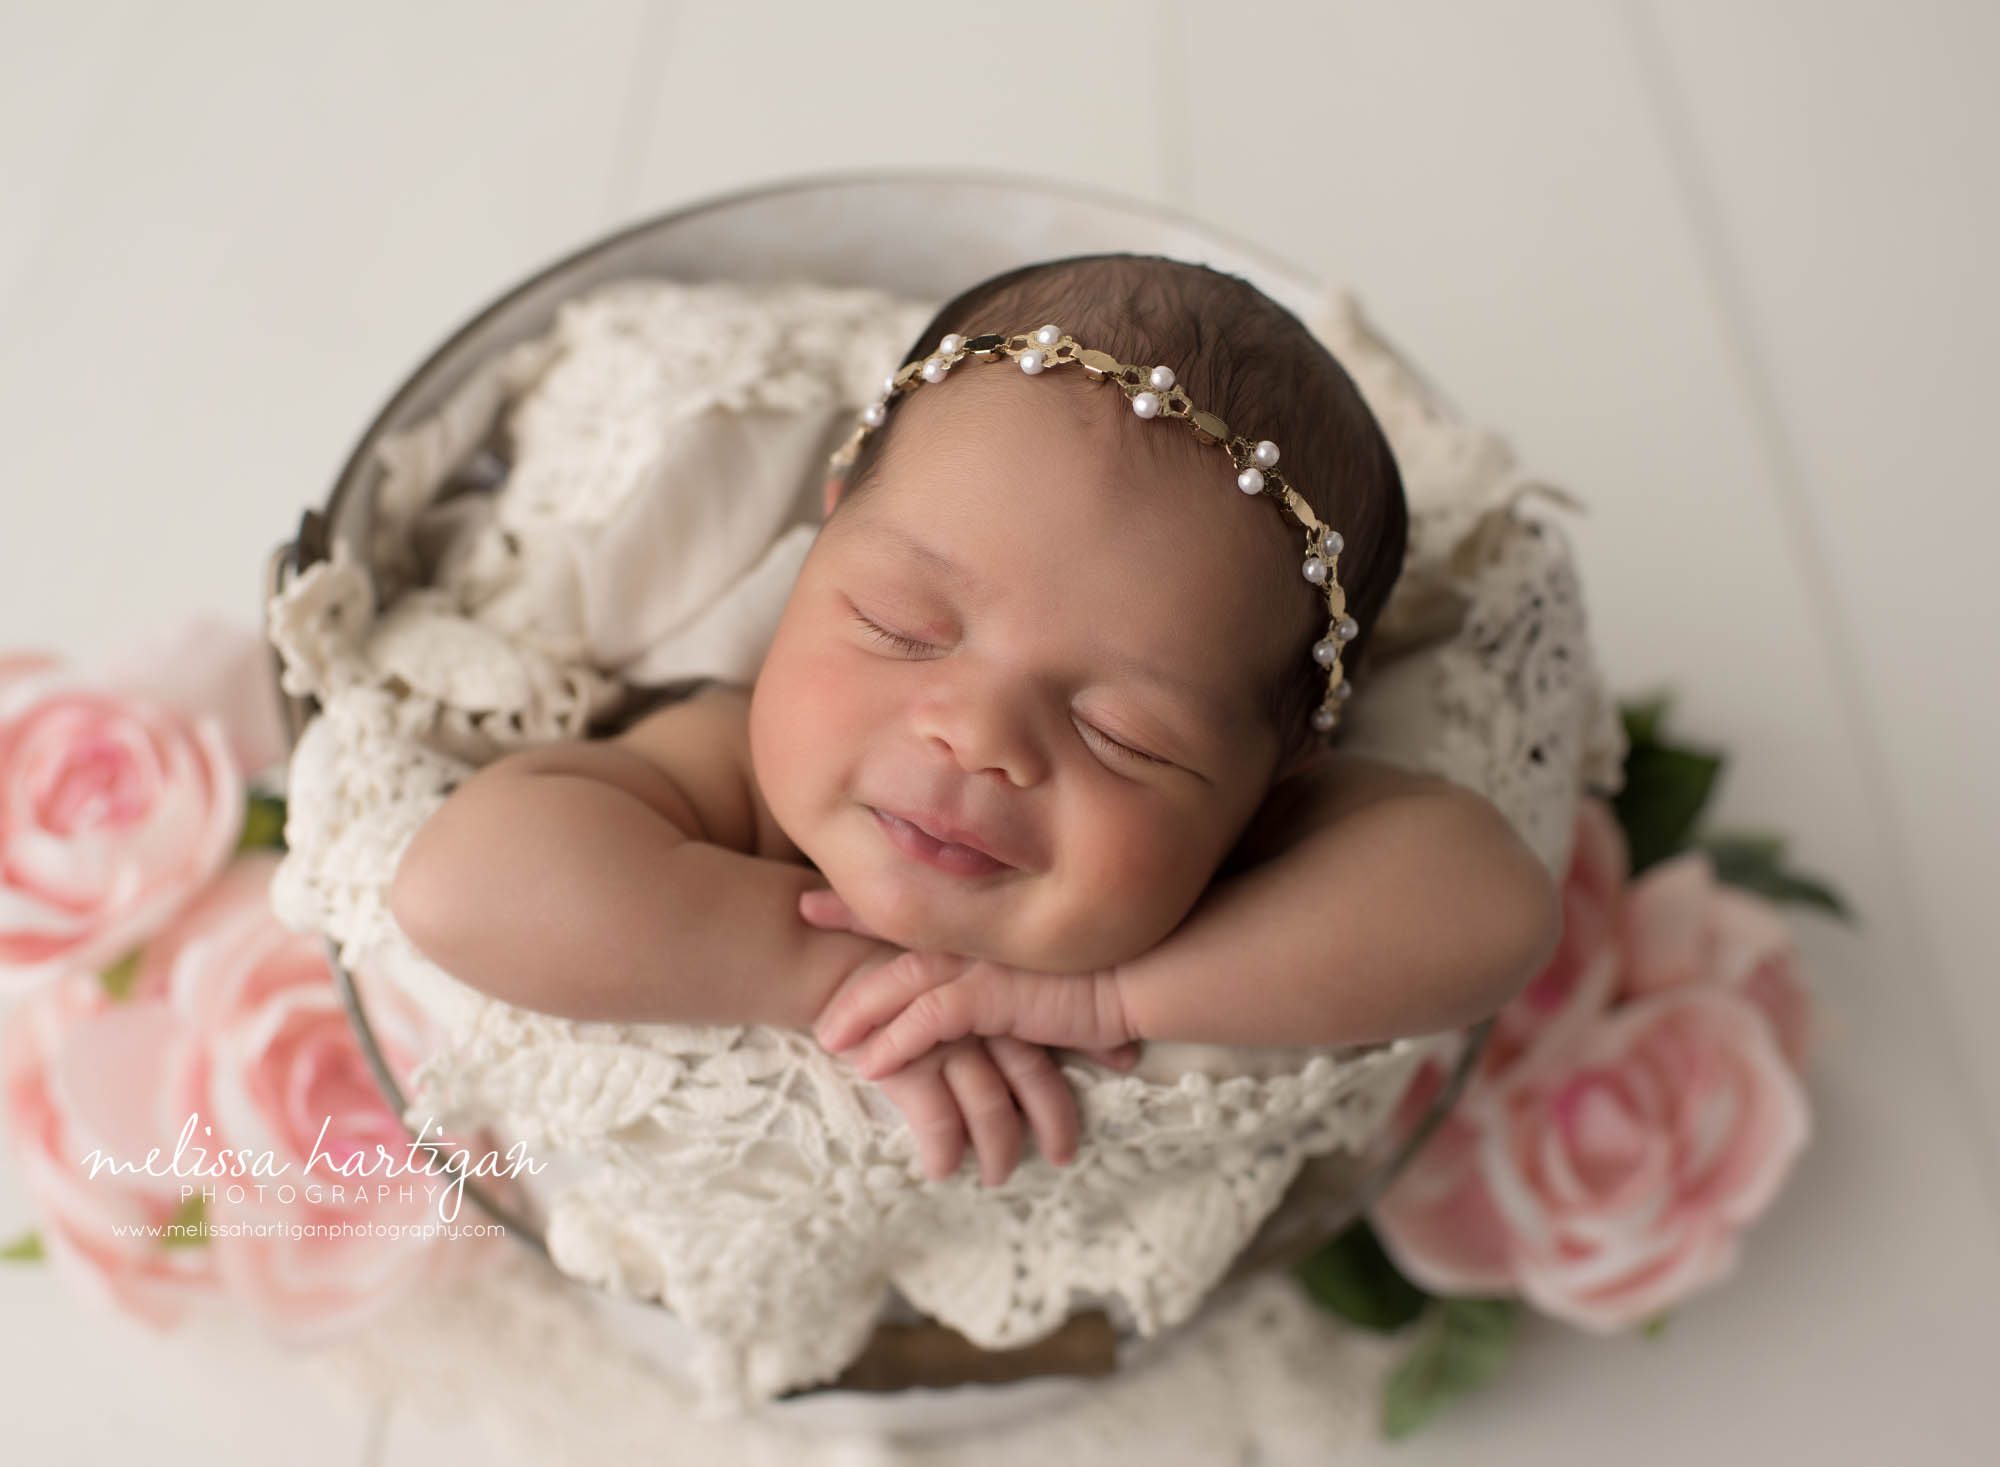 newborn baby girl posed in bucket smiling CT newborn photography session